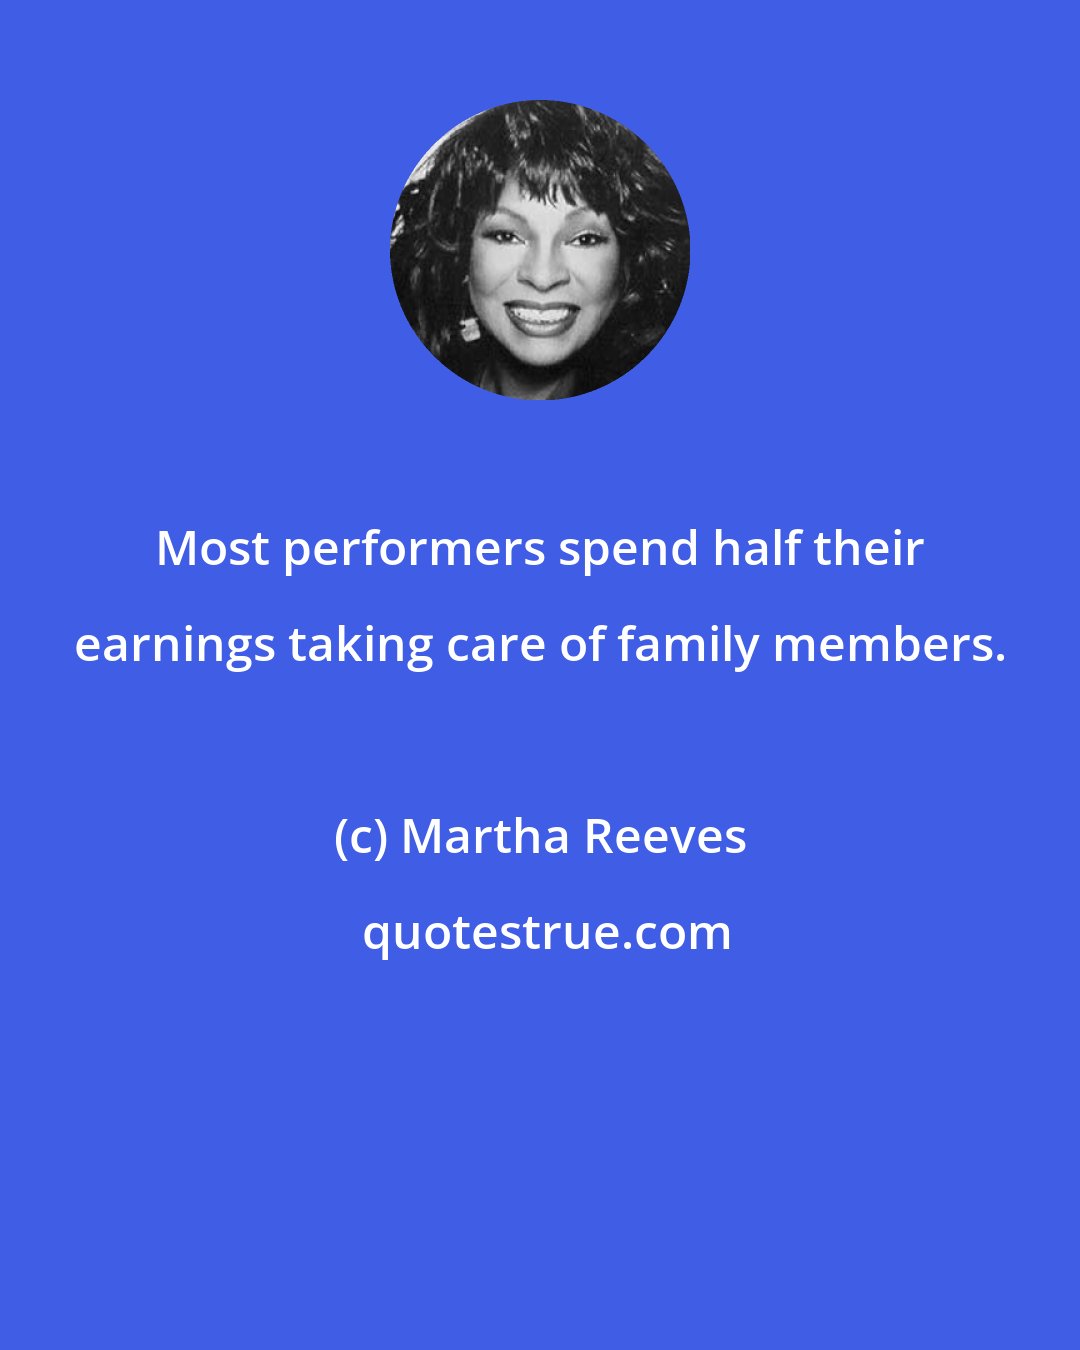 Martha Reeves: Most performers spend half their earnings taking care of family members.